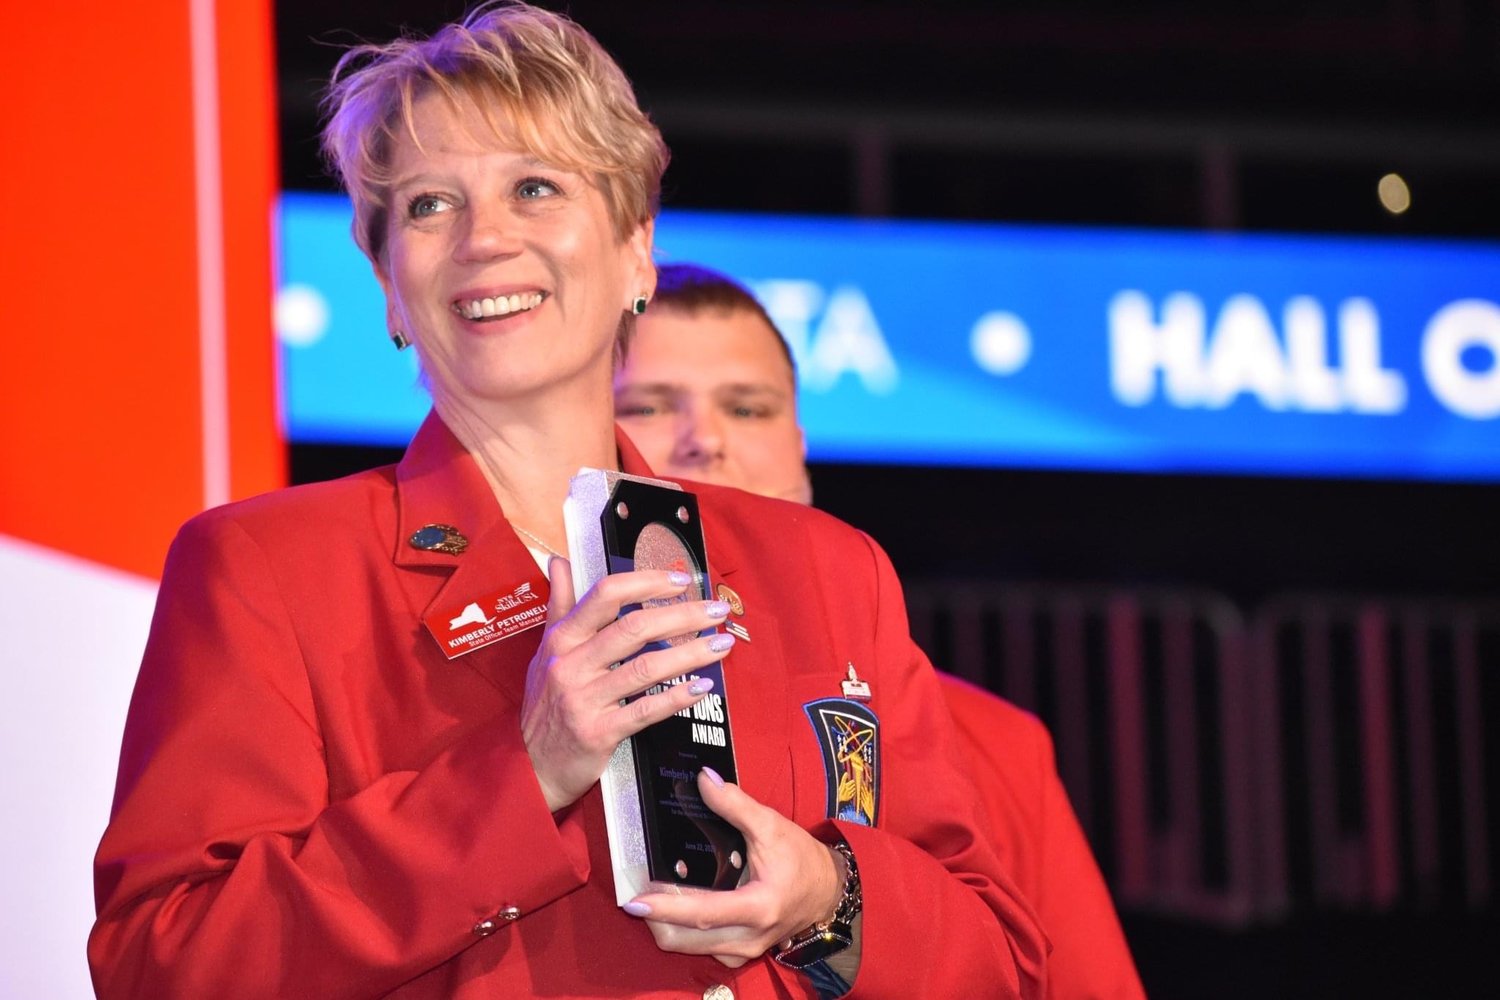 Kimberly Petronella, of  Oneida-Herkimer-Madison BOCES, receives the SkillsUSA Adviser of the Year Award during a ceremony on June 22 in Atlanta.